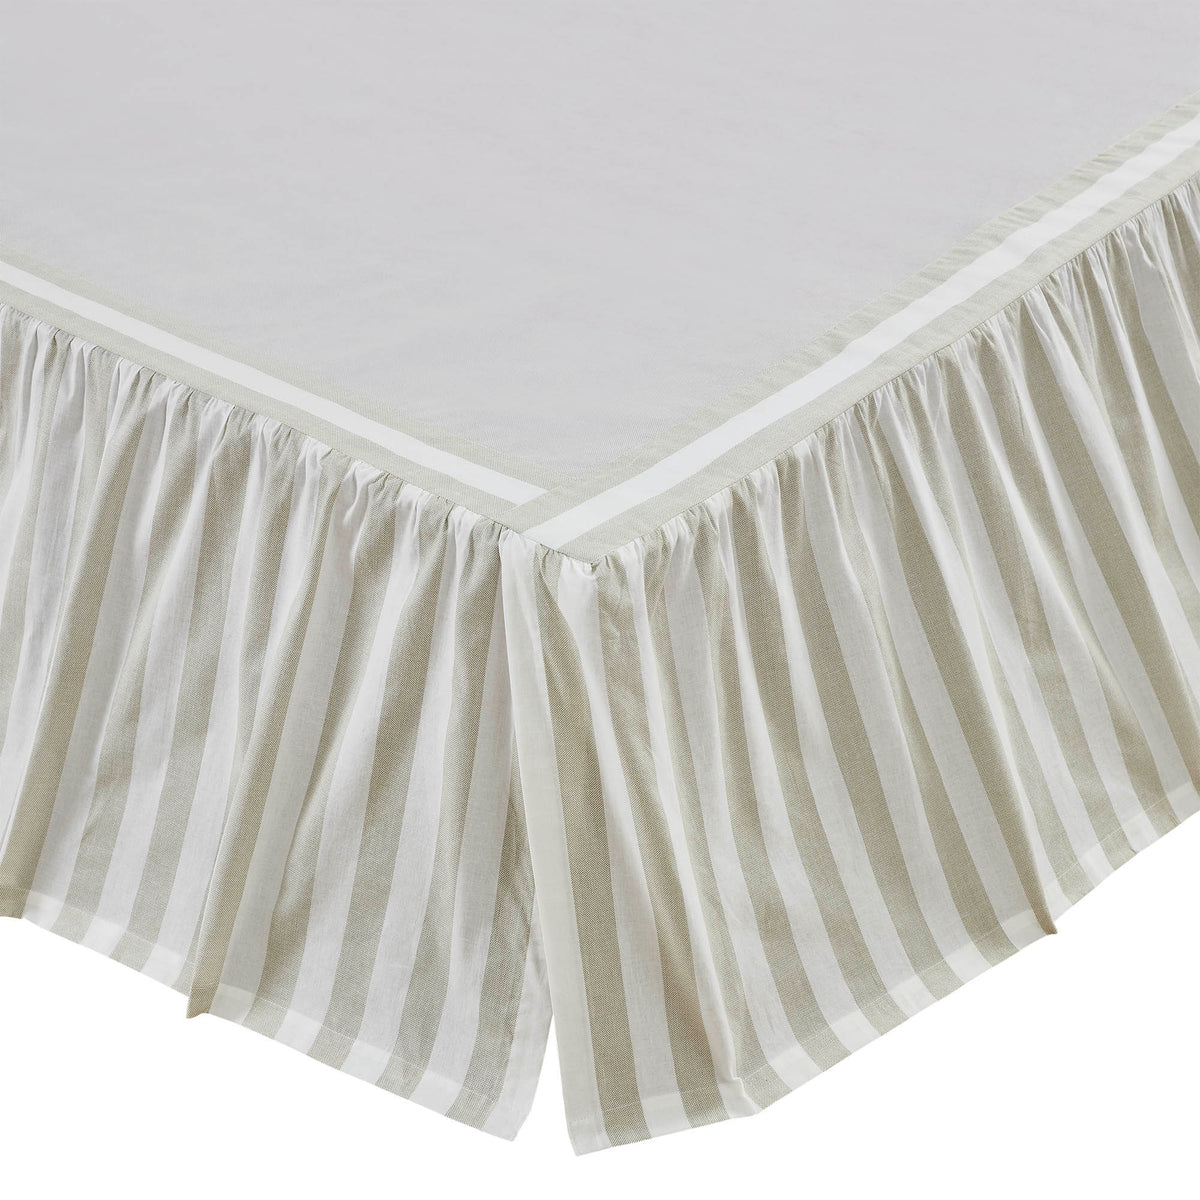 Finders Keepers Ruffled King Bed Skirt 78x80x16